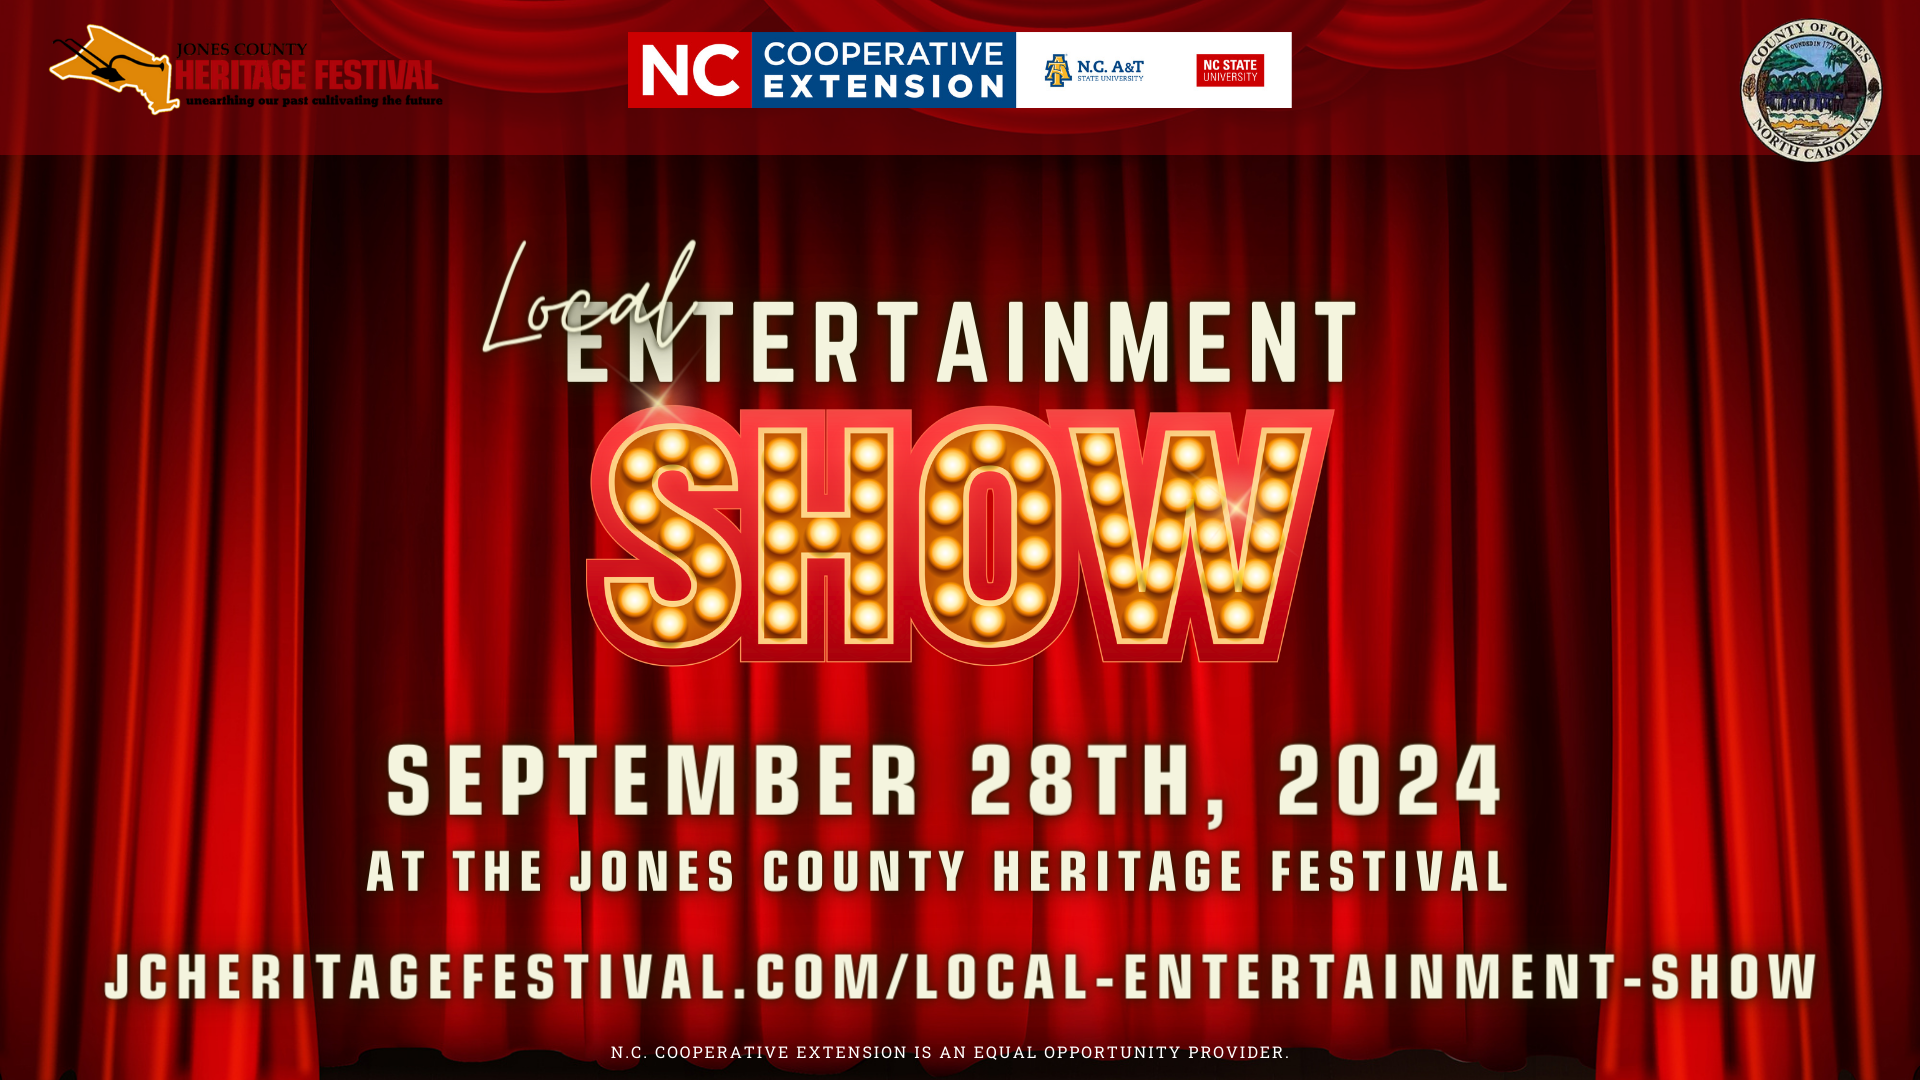 Local Entertainment Show on September 28th, 2024 at the Jones County Heritage Festival